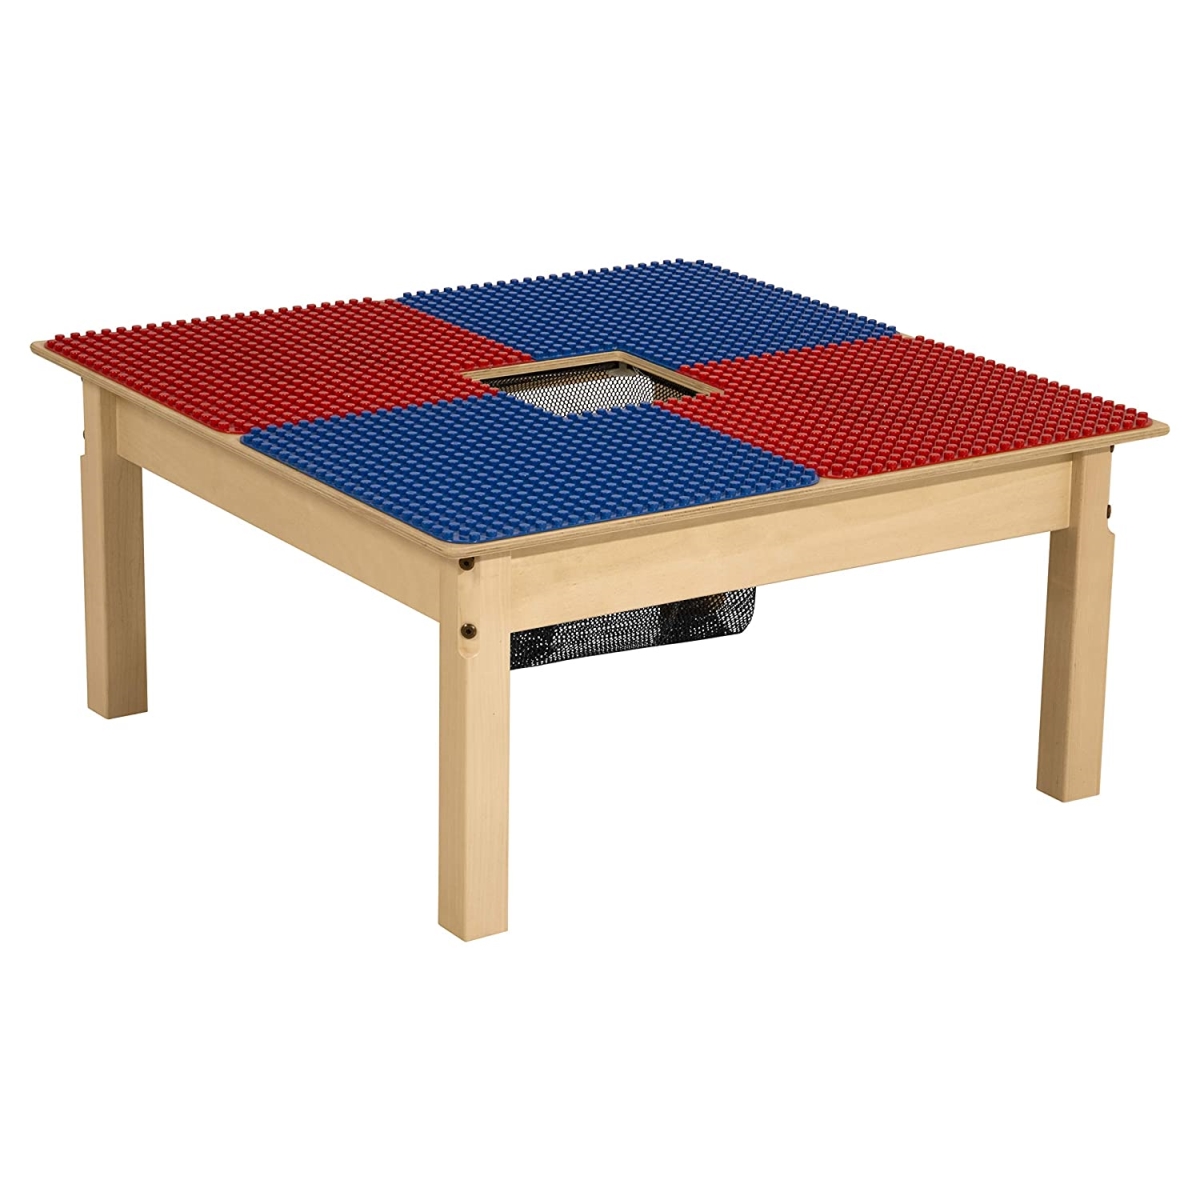 Tp3131pgn20-br 20 In. Duplo Compatible Table With Legs, Blue & Red - Square